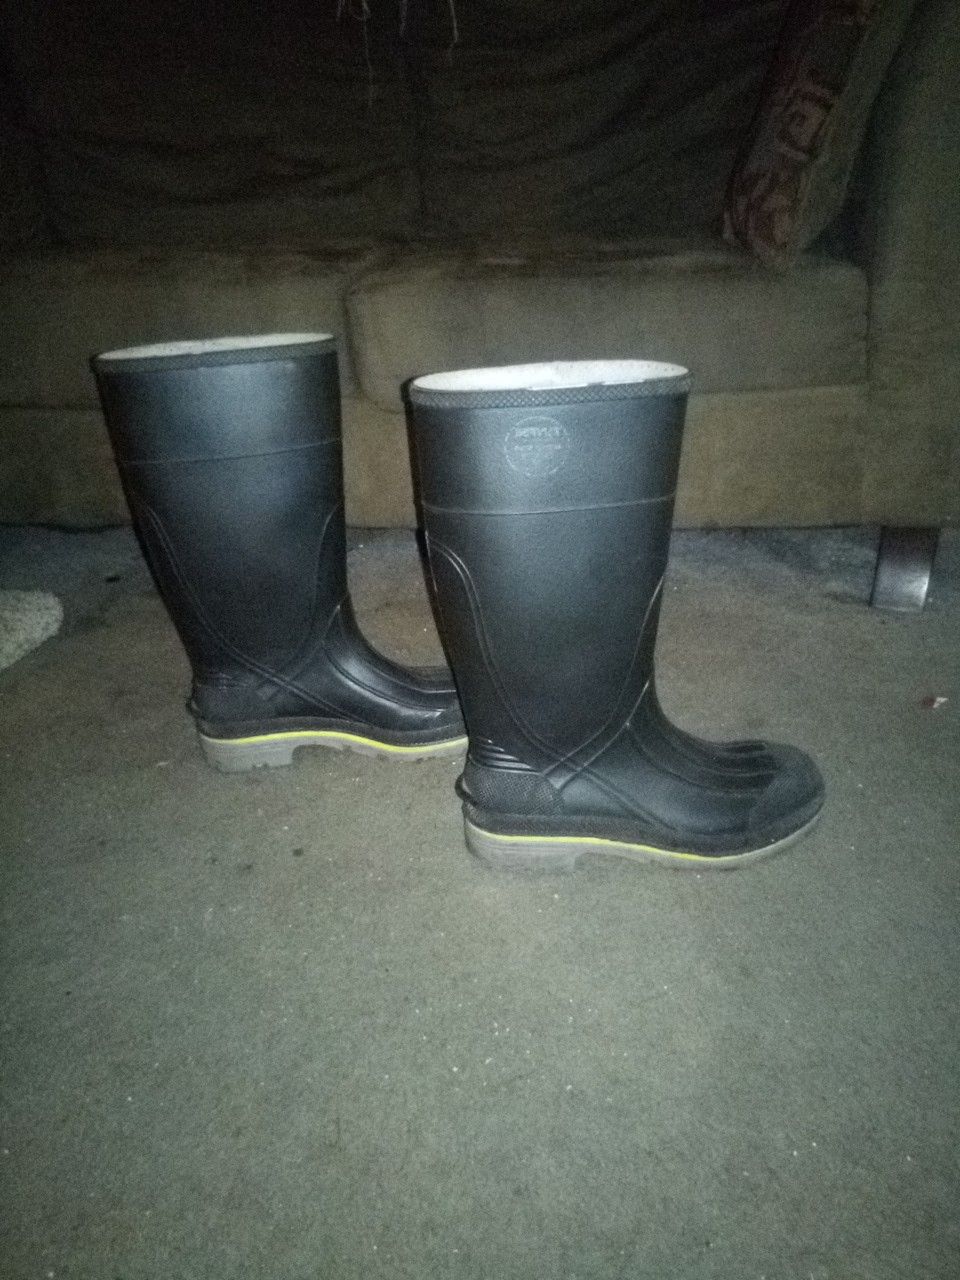 Rain boots-mens. Needs to go today.